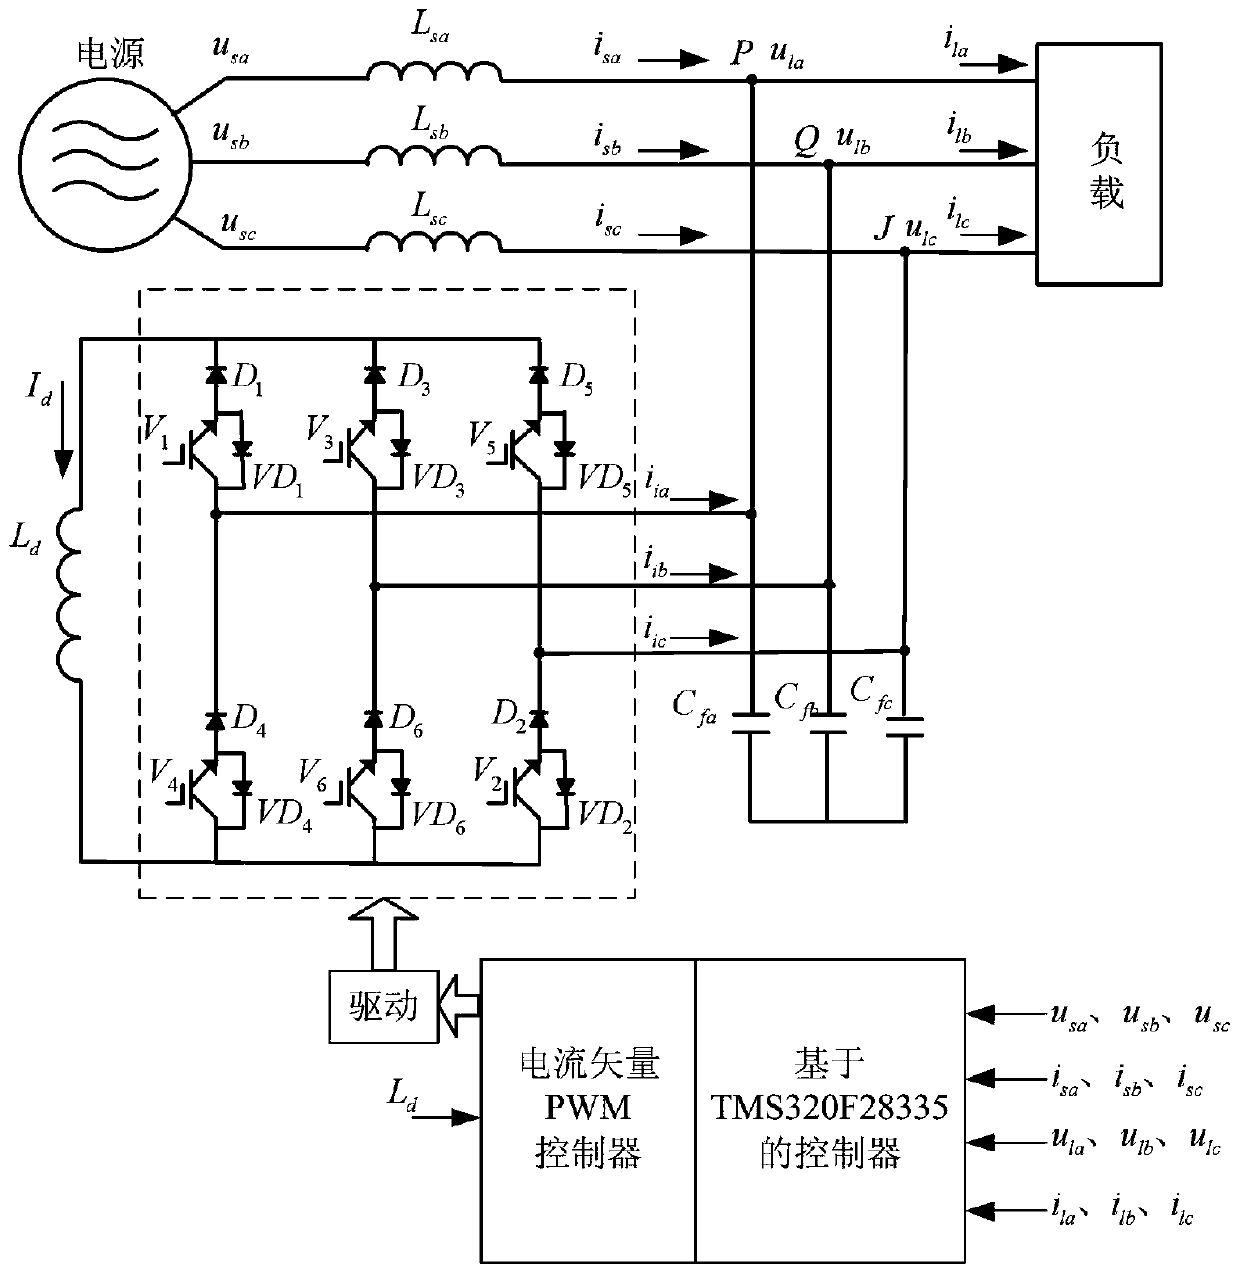 Novel power quality controller based on current-mode inverter and control method thereof